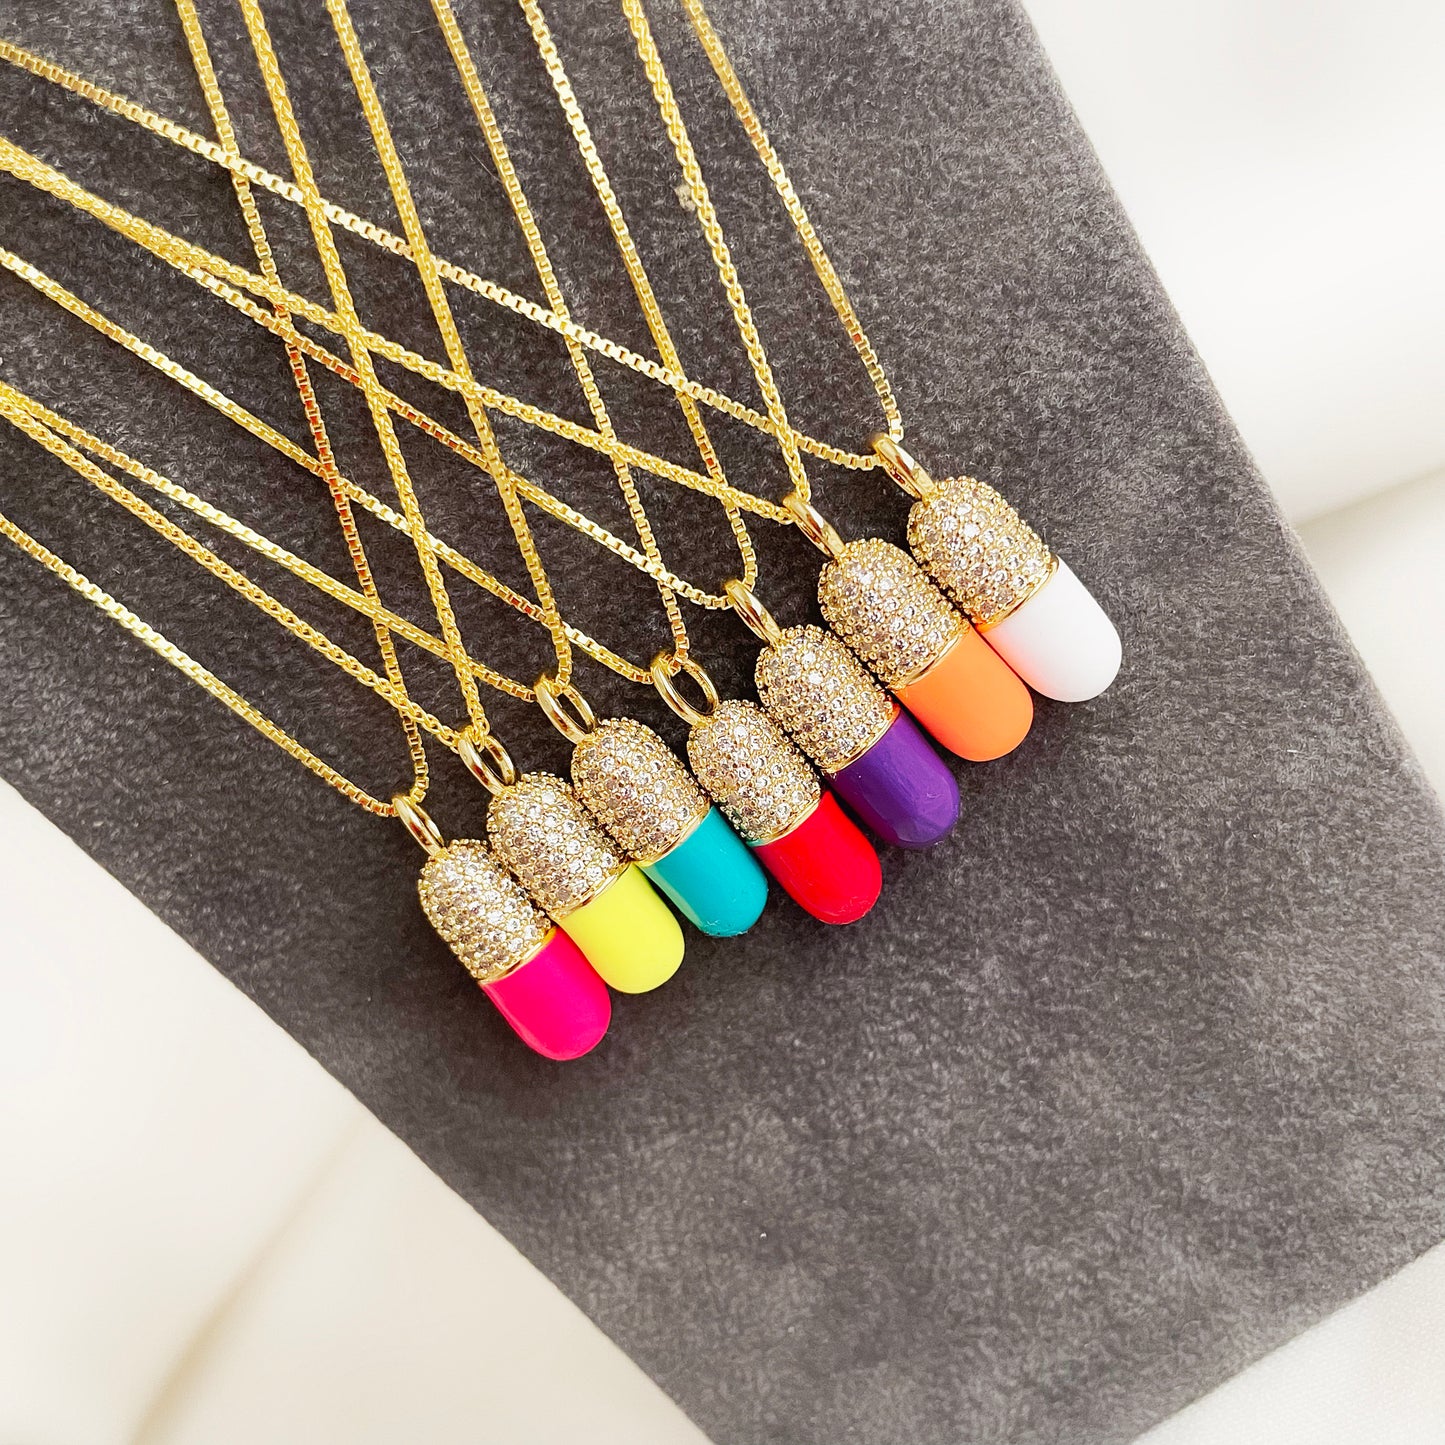 Pill Necklaces | Sparkly Pills